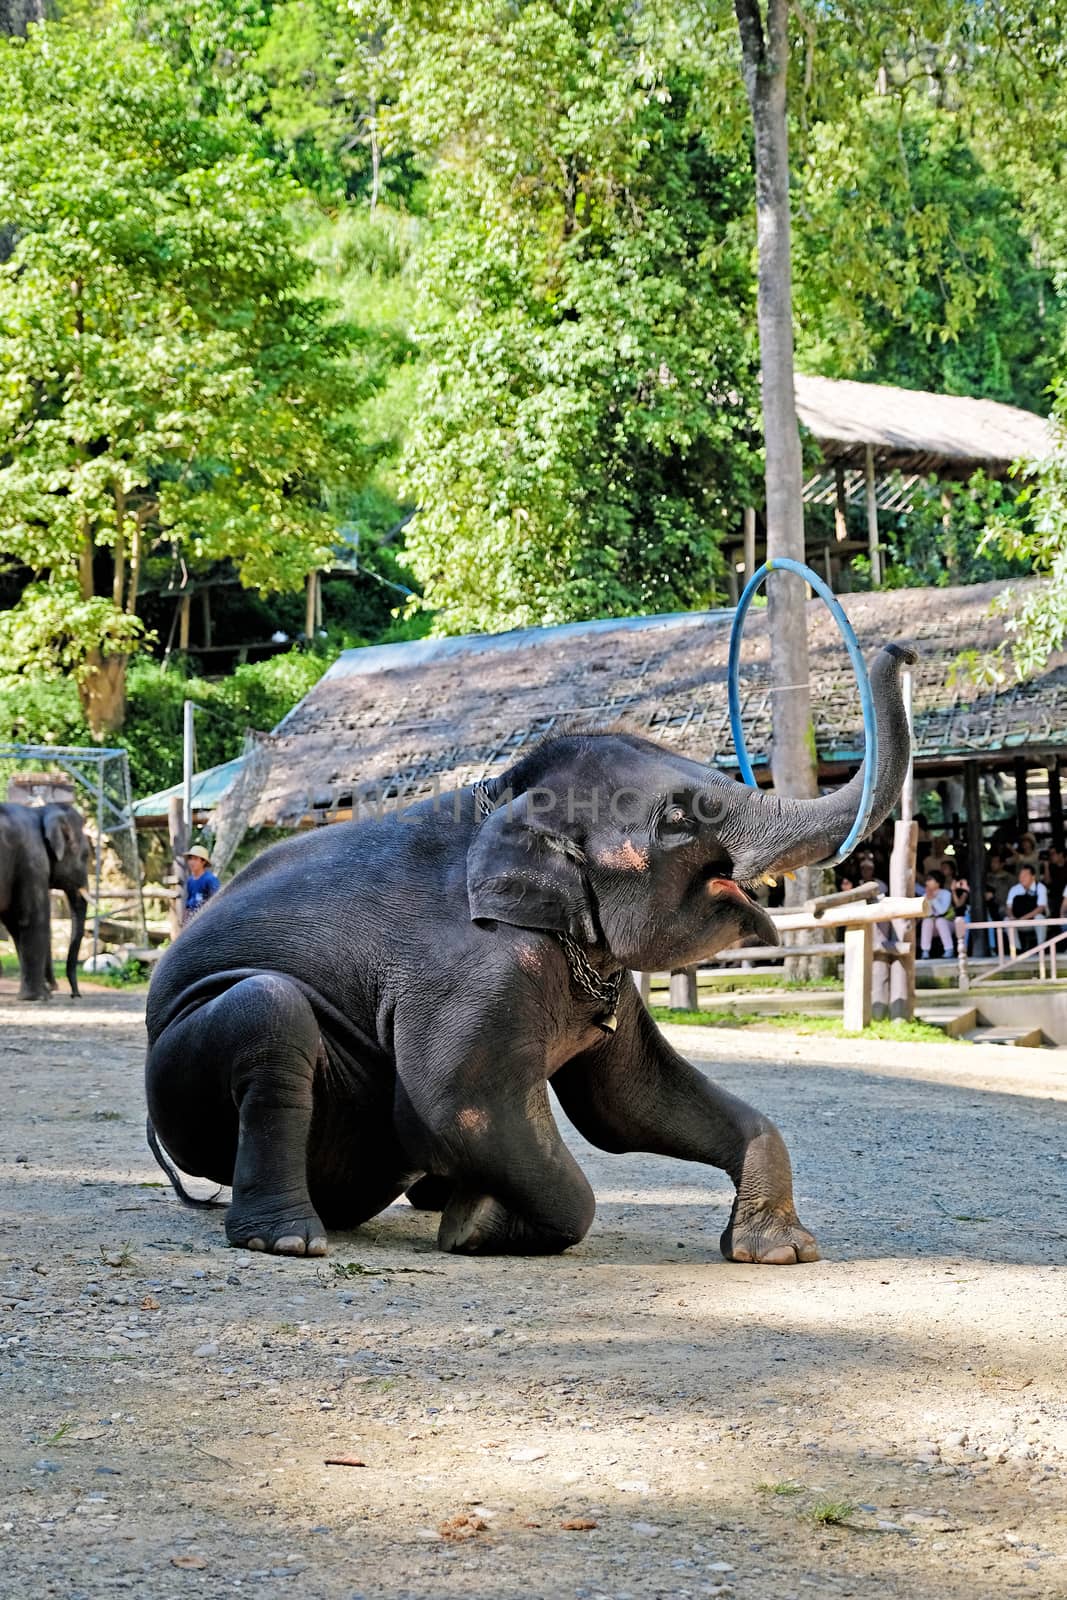 The elephants showing their skill of playing hula hoop for the e by Surasak